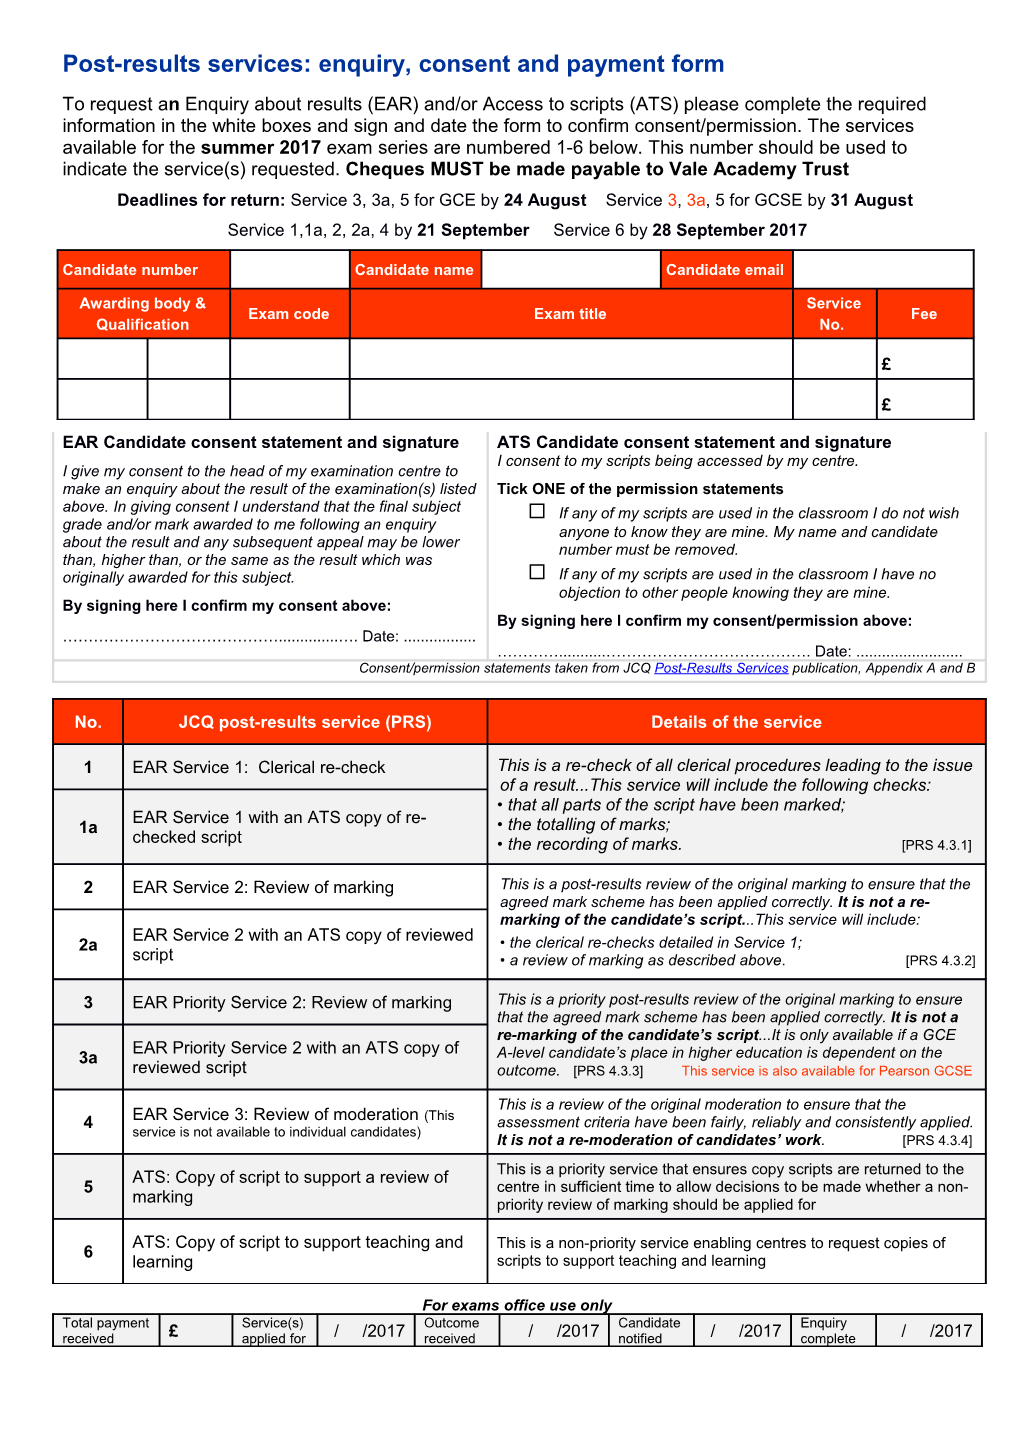 Post-Results Services: Enquiry, Consent and Payment Form